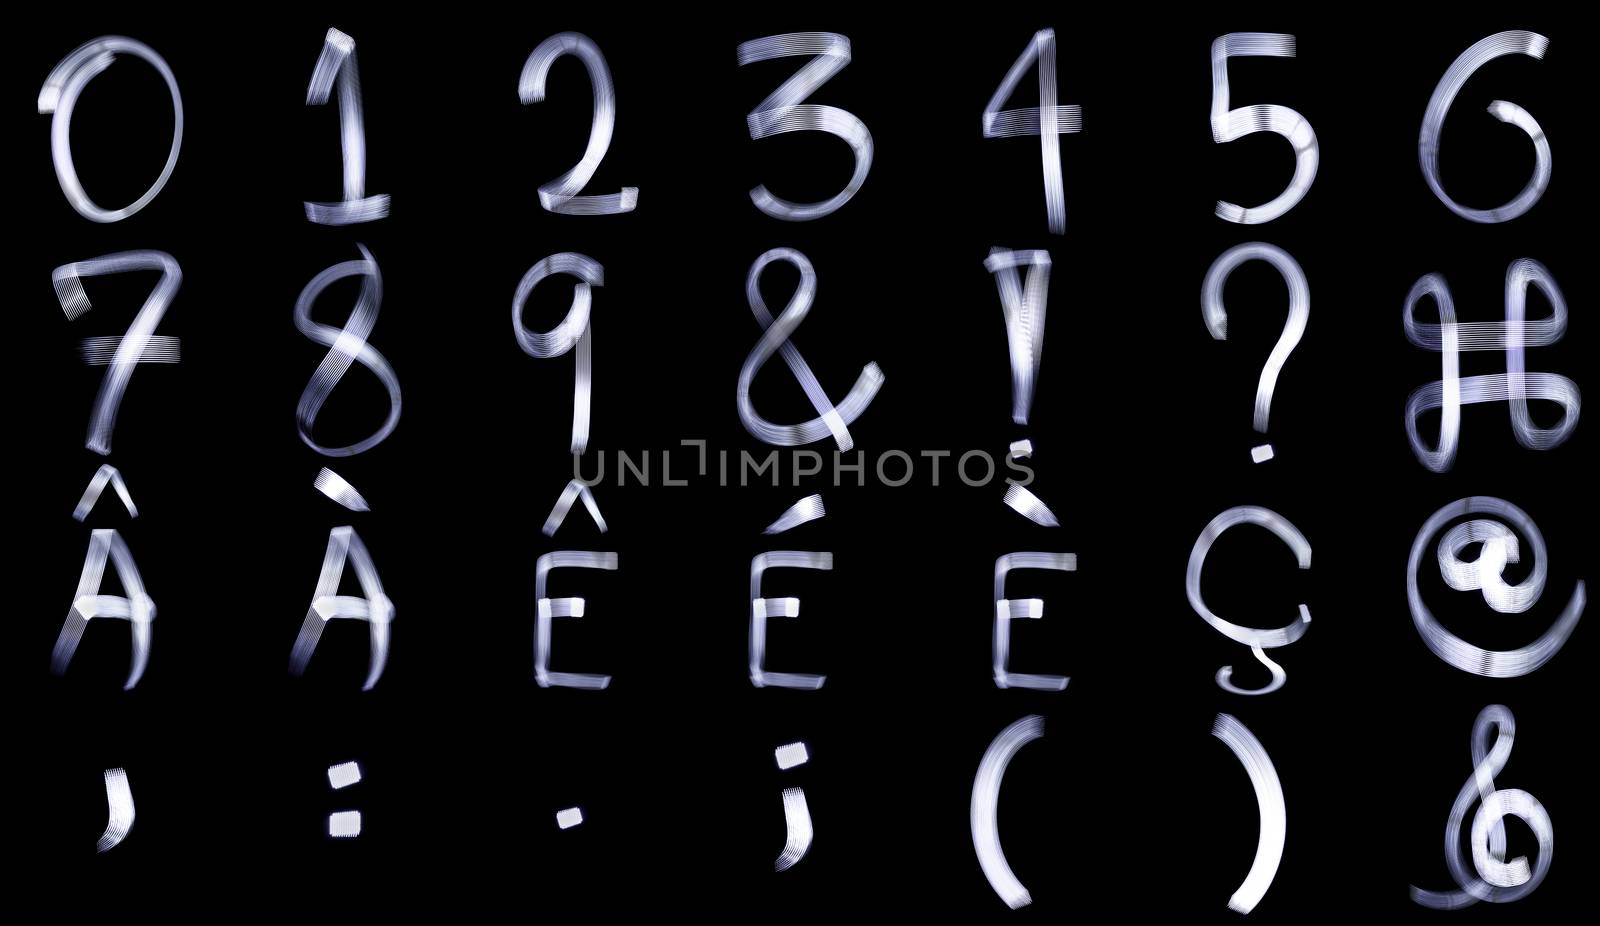 Light Painting Special Characters for French Language and Numerals Alphabets